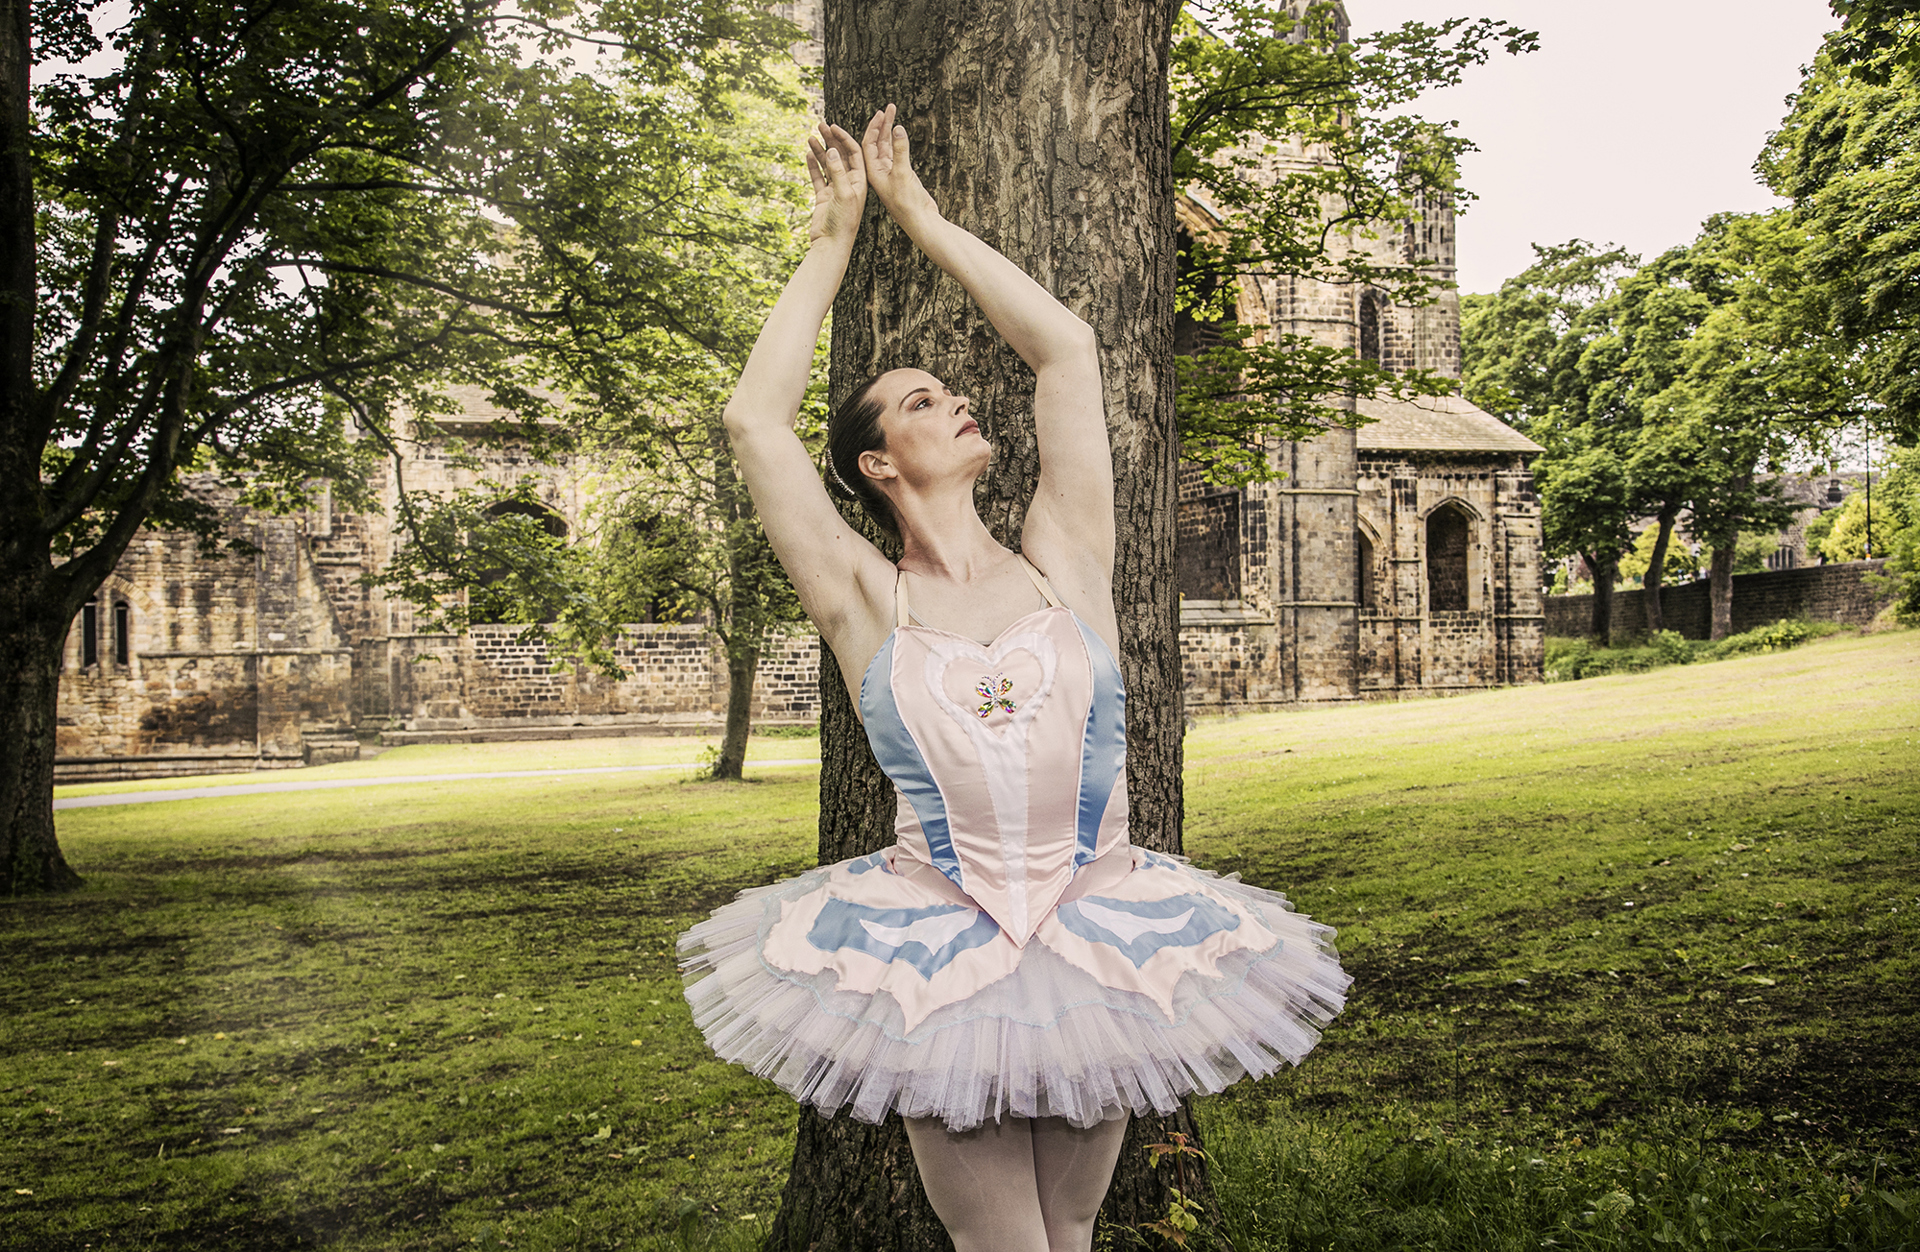 Transgender female ballera wearing Trans flag tutu, arms raised above her head in front of tree and old building in the background